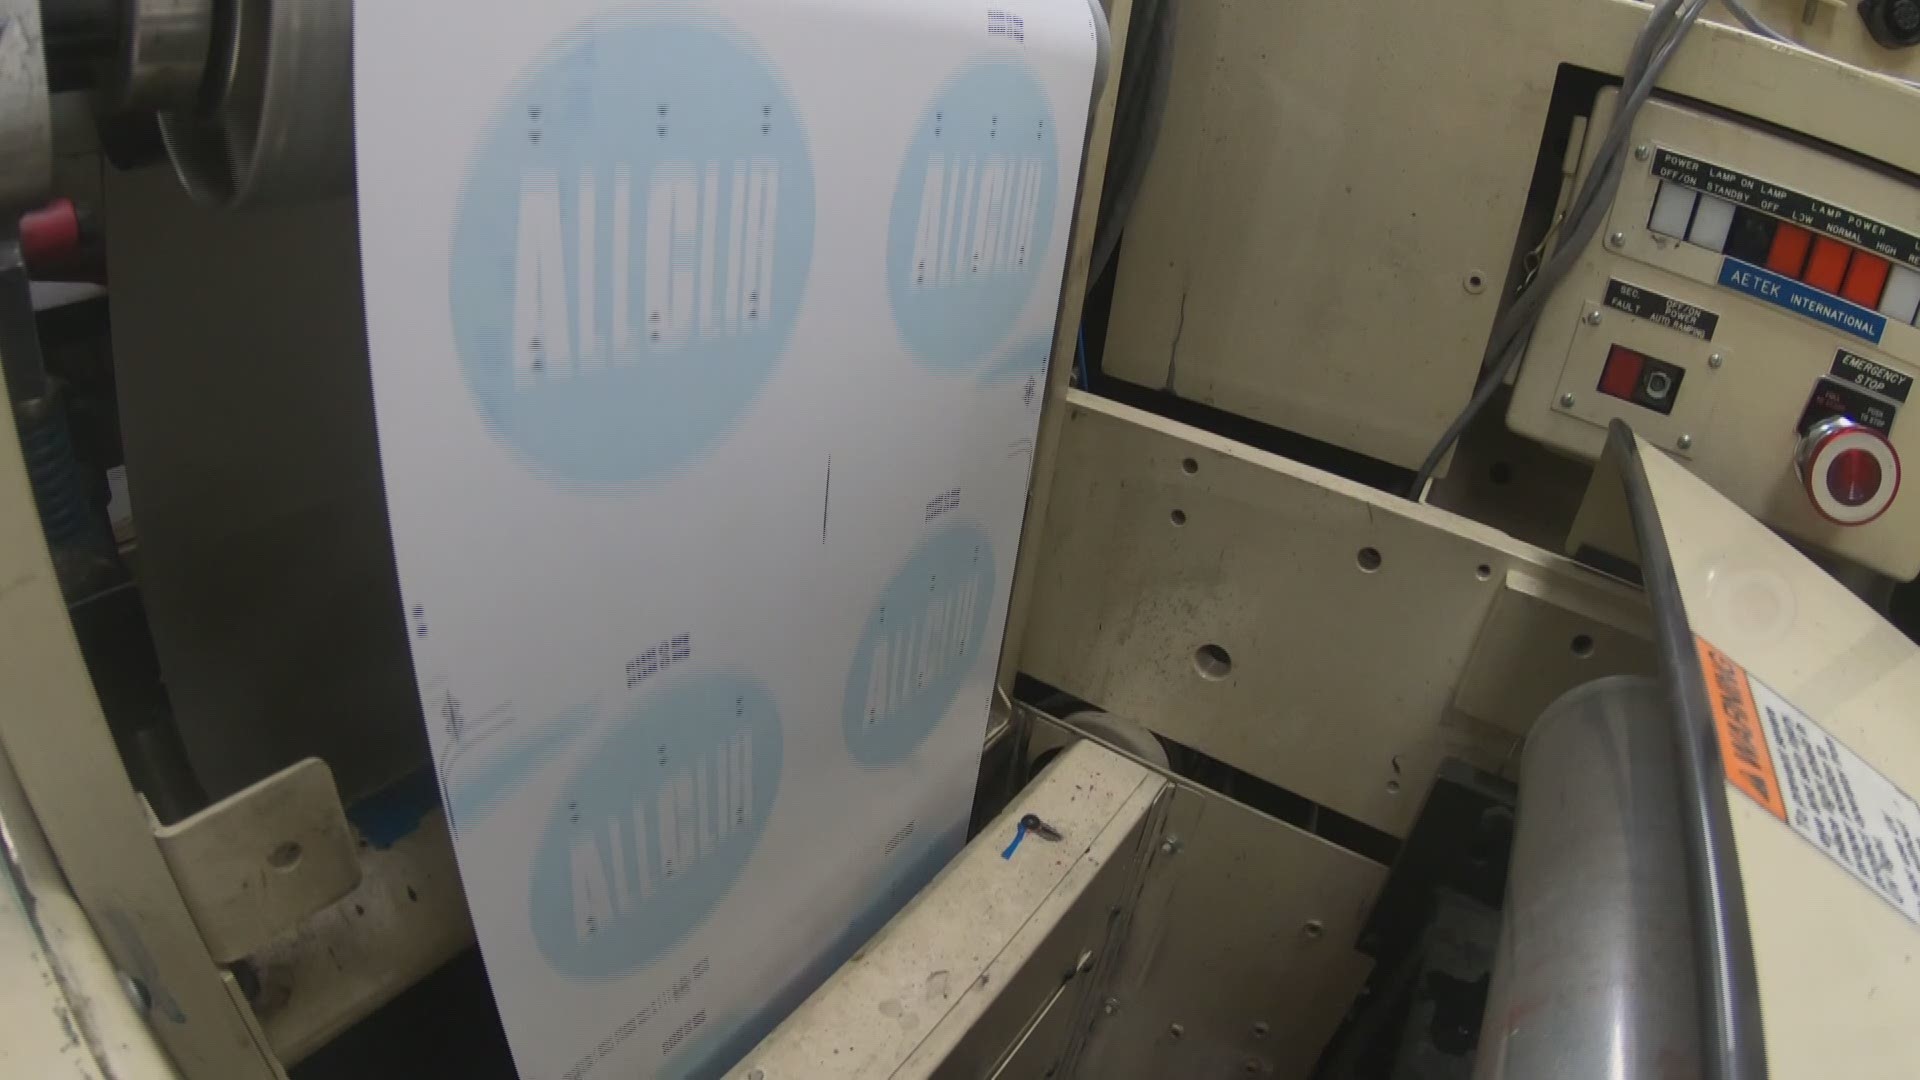 AllClir is a pH-activated compound that is printed on cardboard-like coasters and stickers for businesses to show their customers and employees the area is safe.